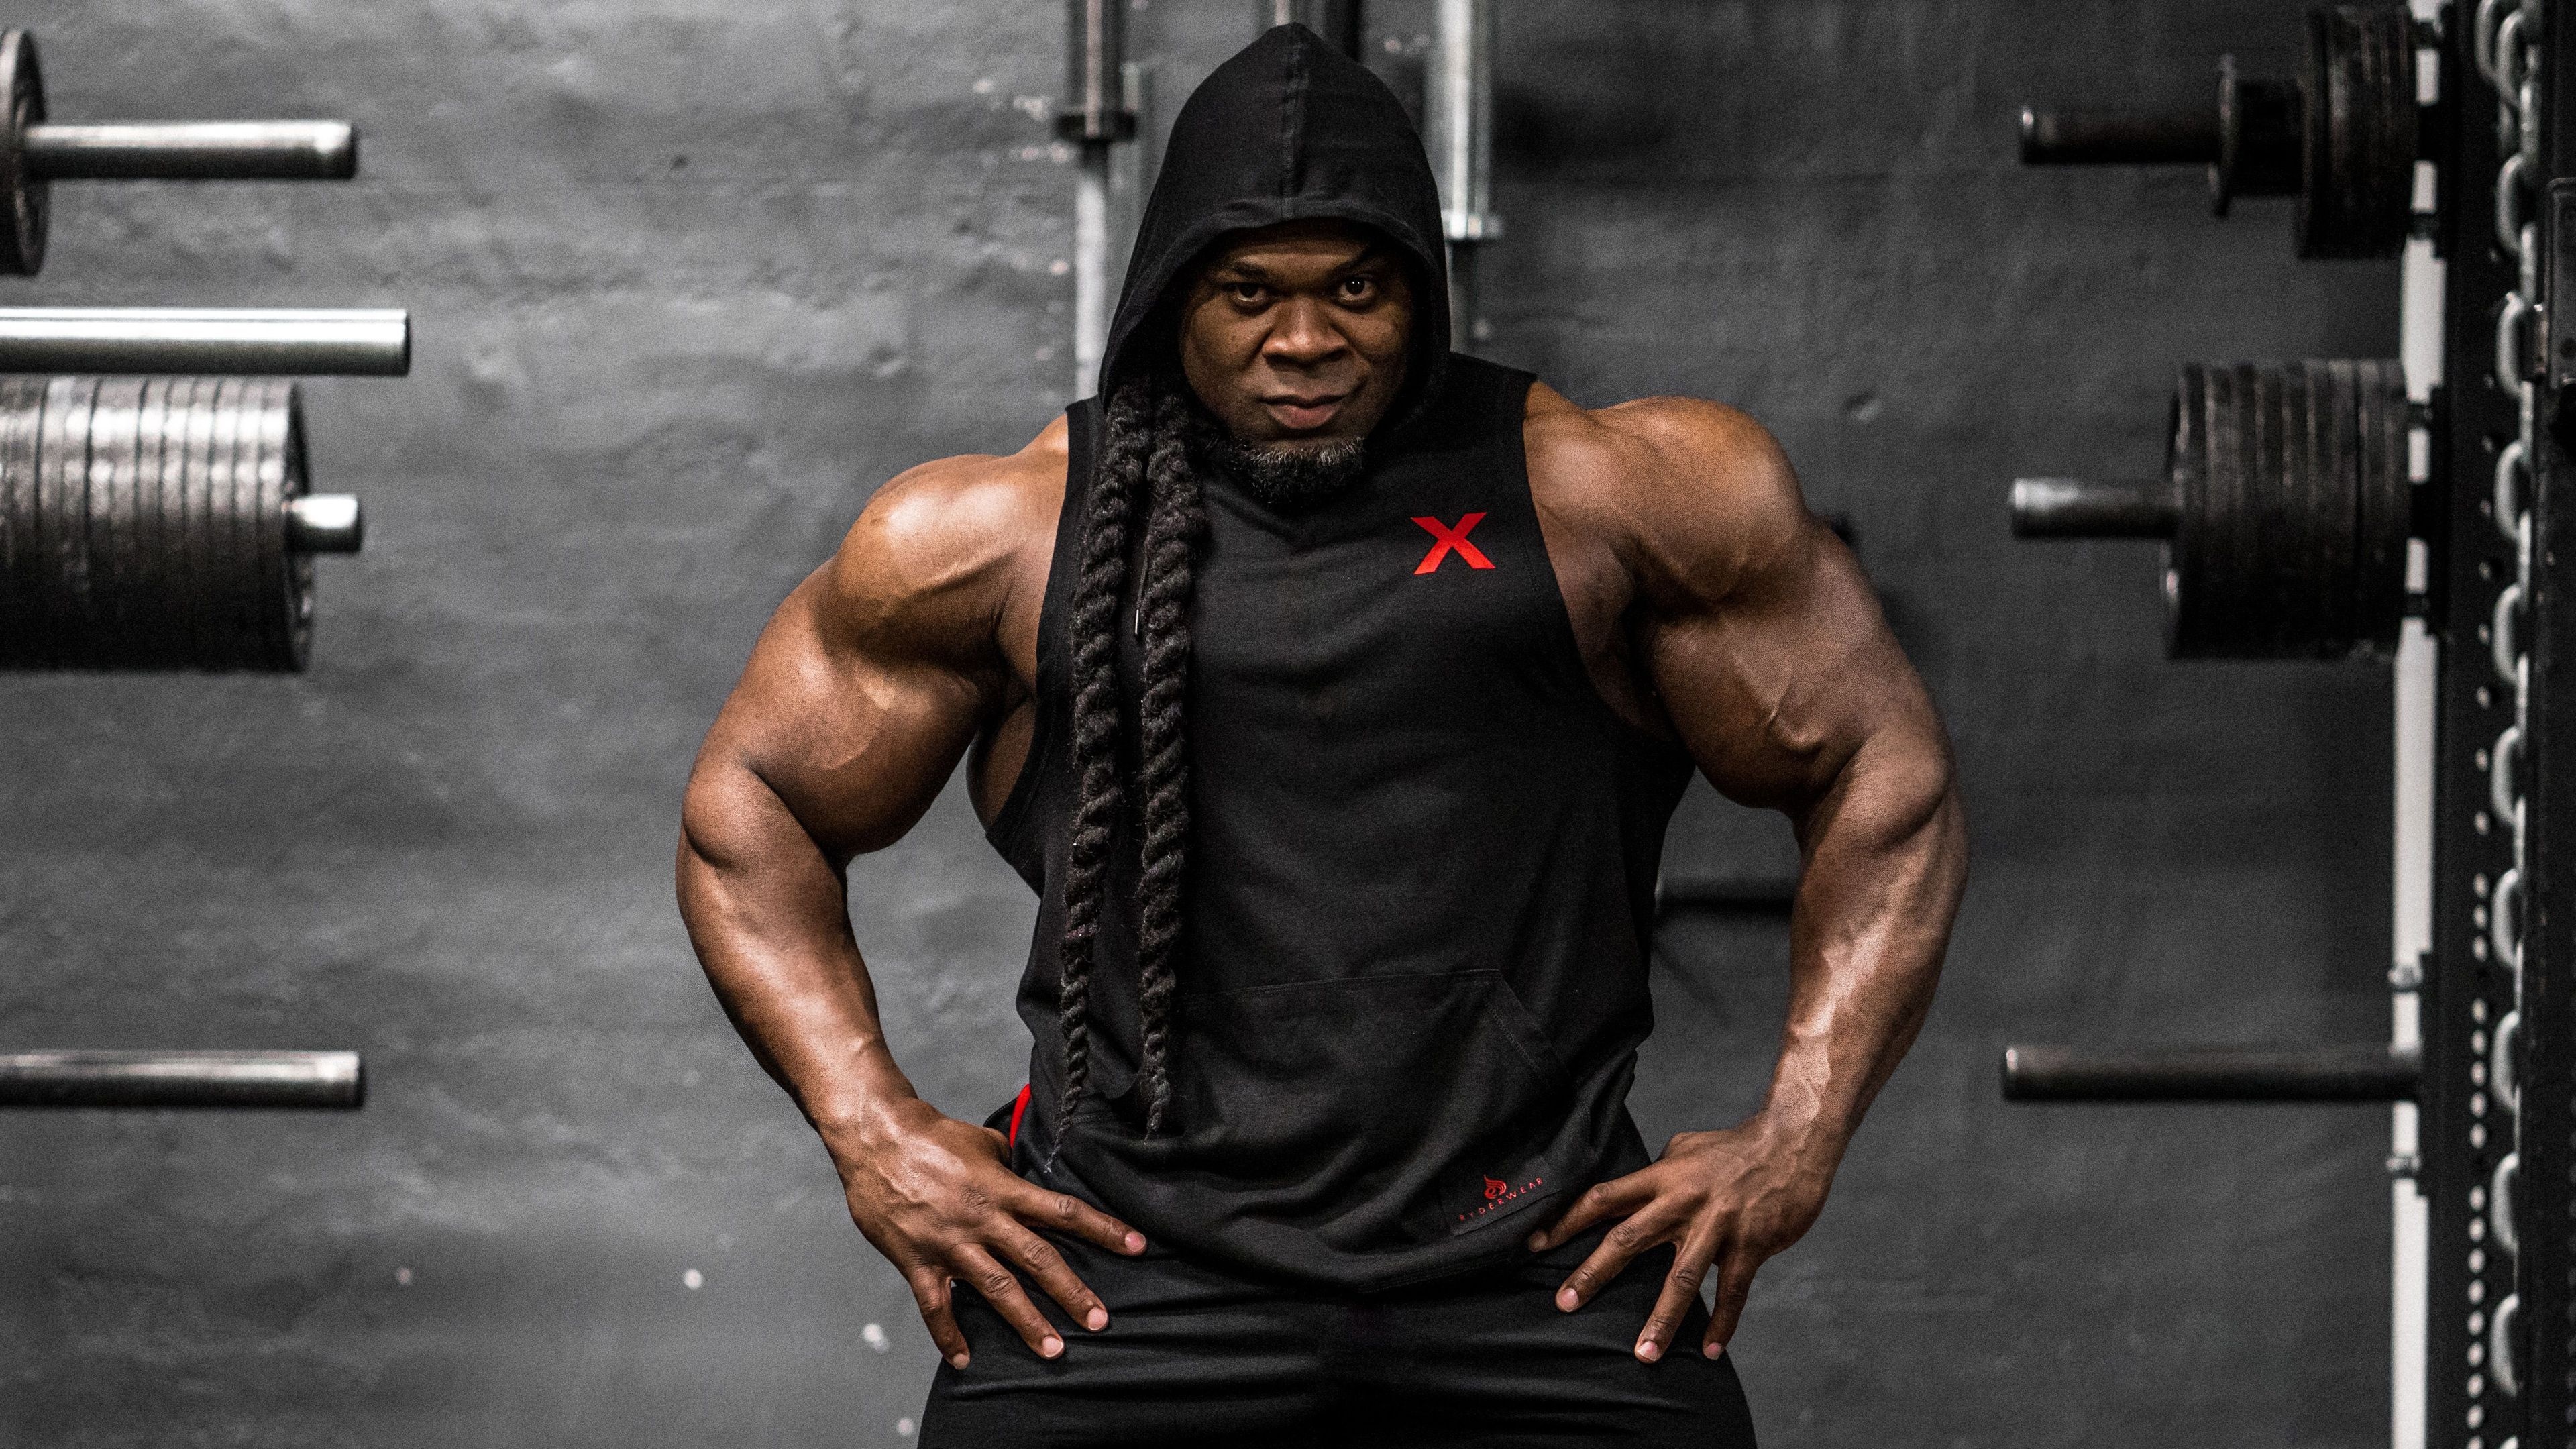 Bodybuilding: Kai Greene, Gym, Competitive sport whose goal is to achieve muscular perfection. 3840x2160 4K Wallpaper.